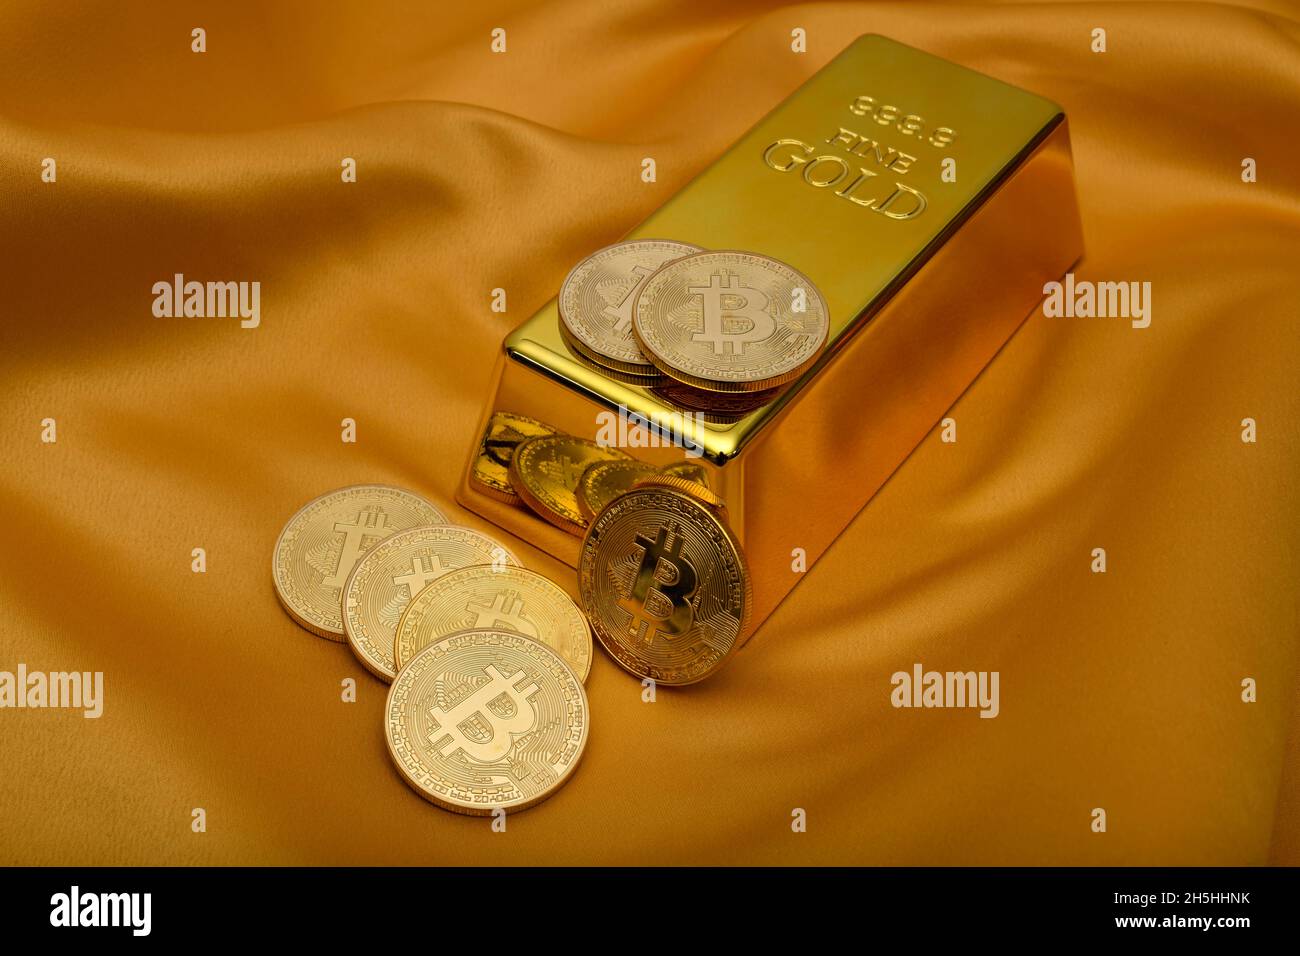 Gold bar fine gold fineness 999.9 and Bitcoin cryptocurrency, Baden-Wuerttemberg, Germany Stock Photo